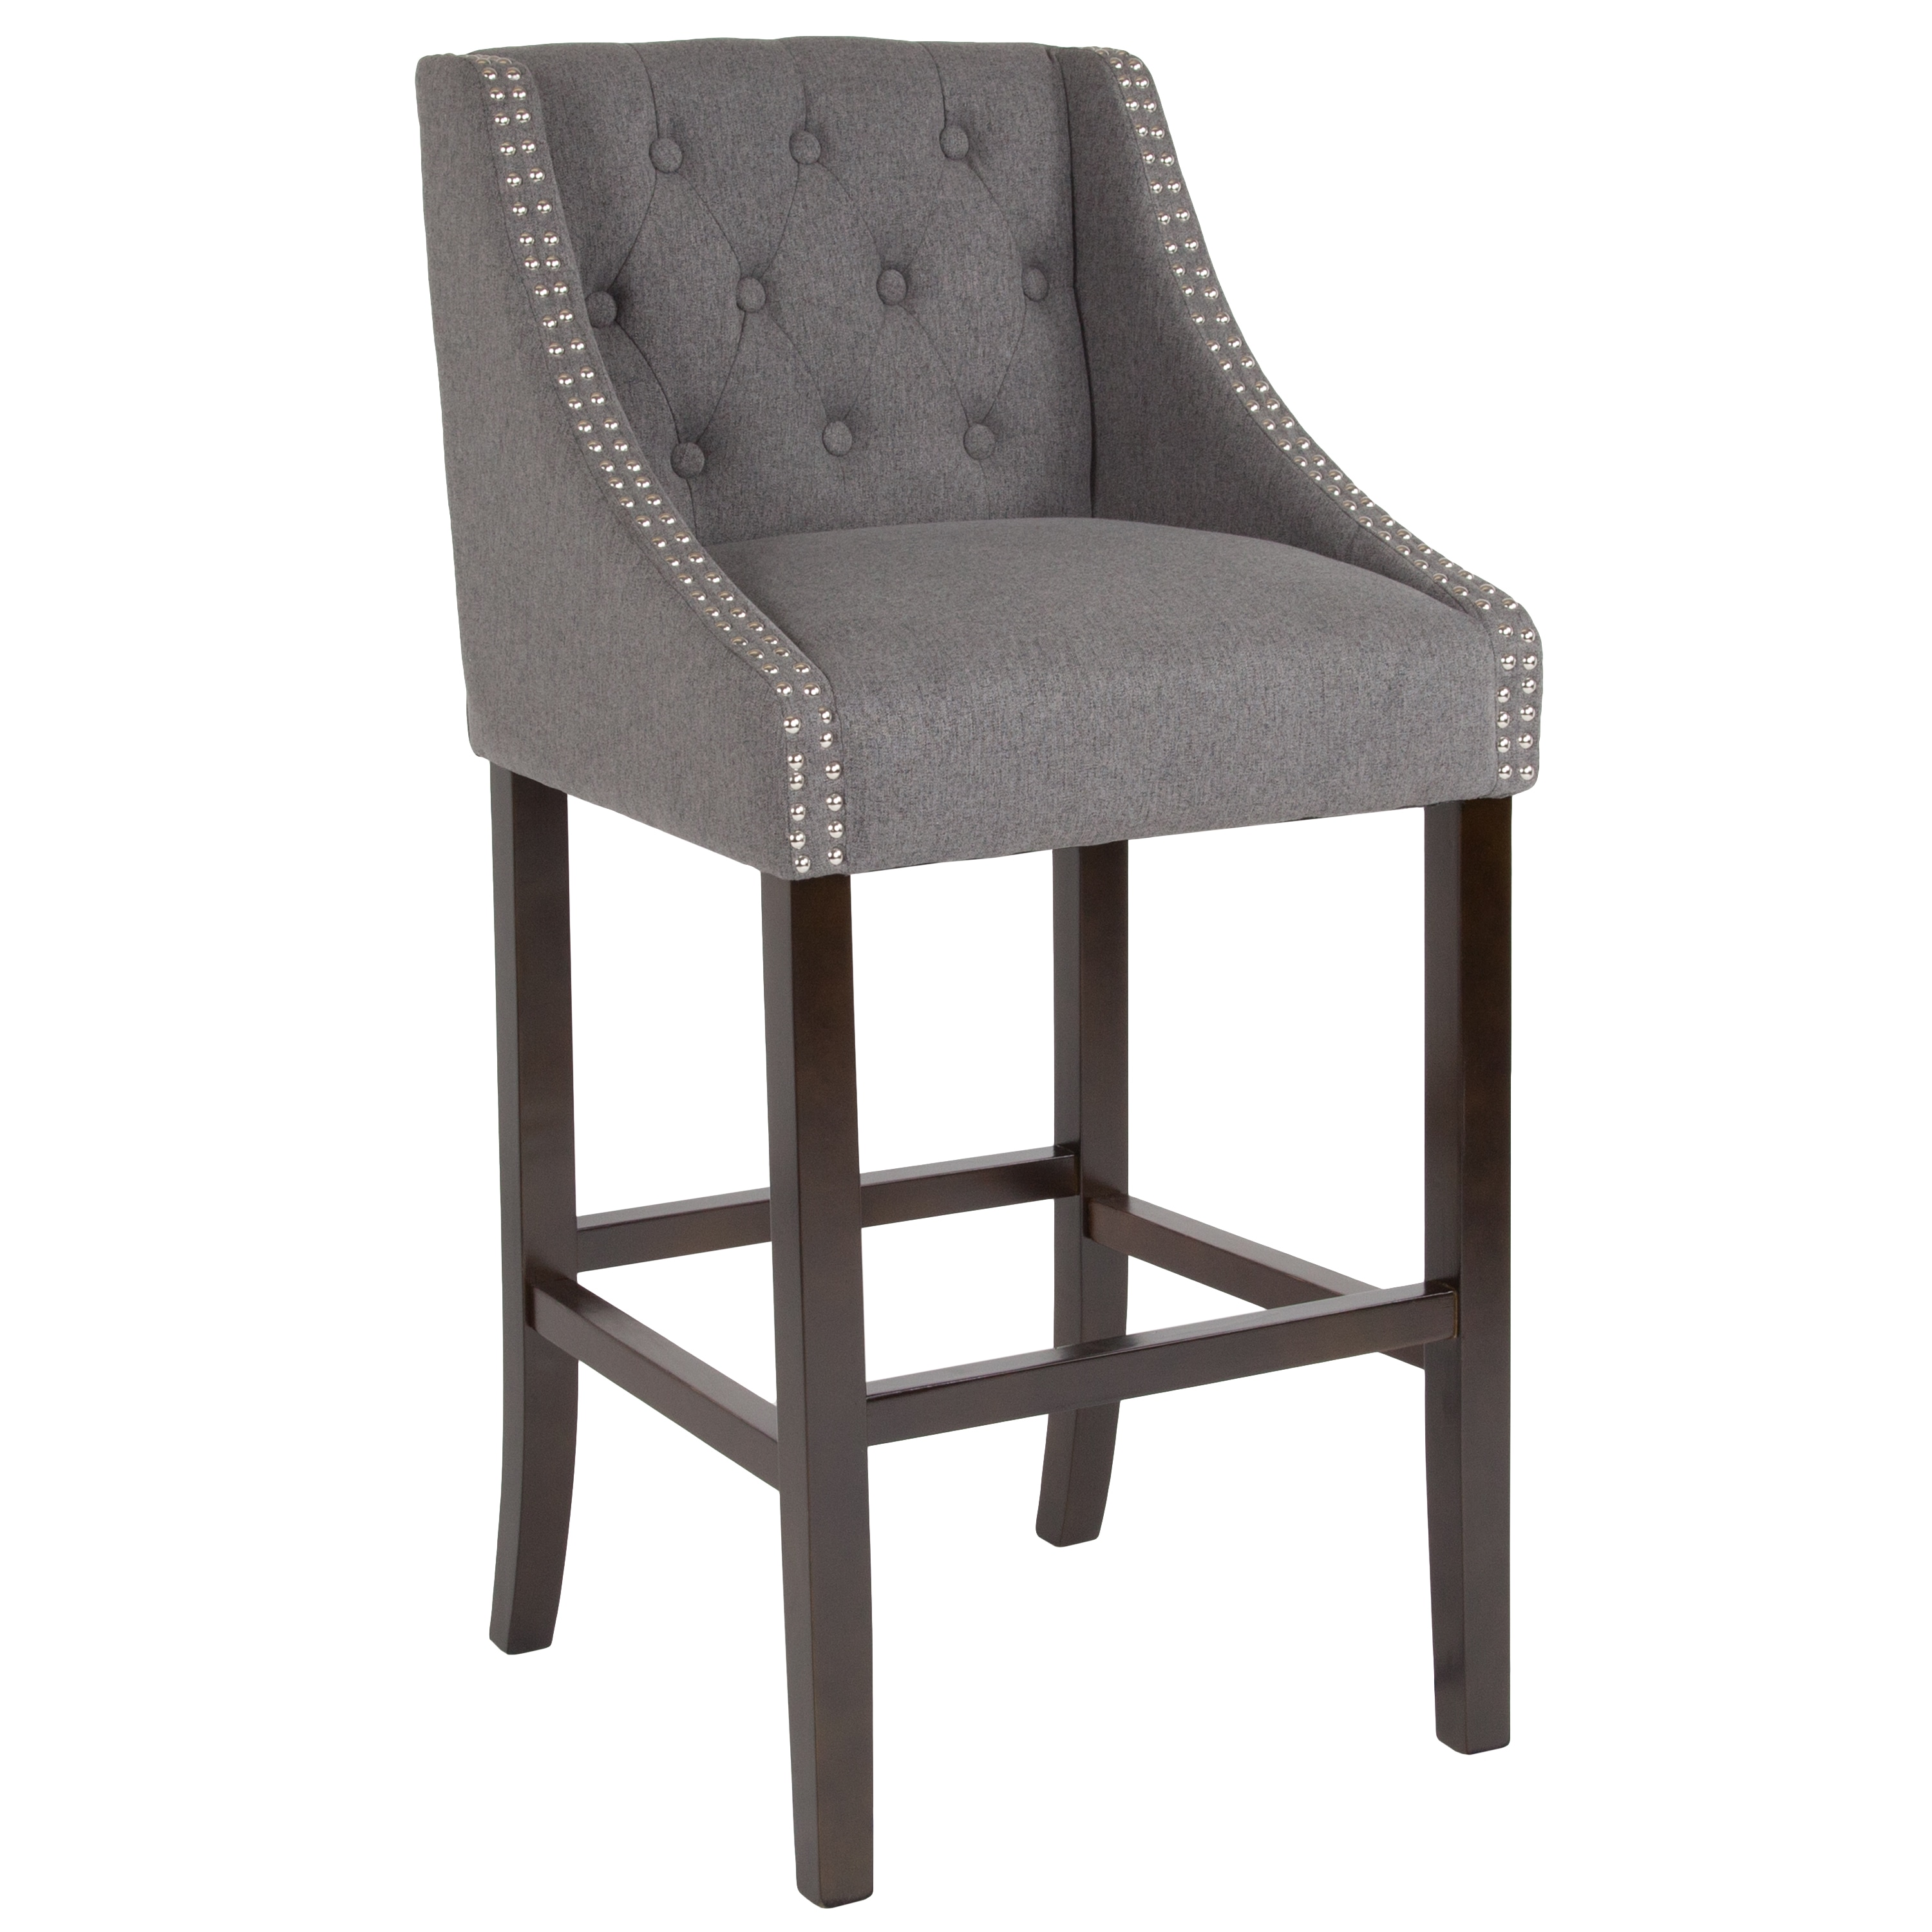 Upholstered Bar Stool In The Stools, Tufted Fabric Bar Stools